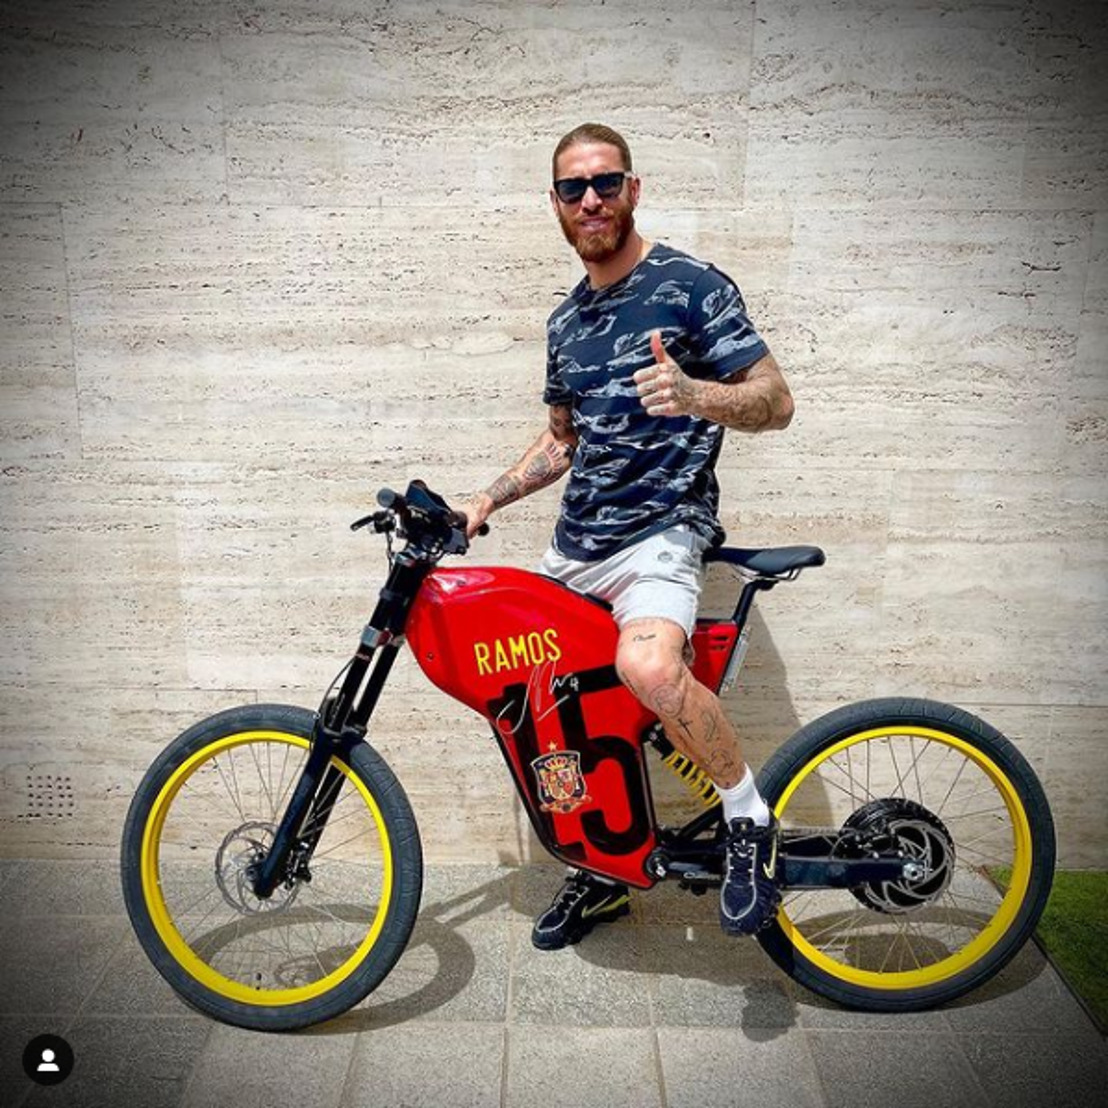 Sergio Ramos shows off his new toy.